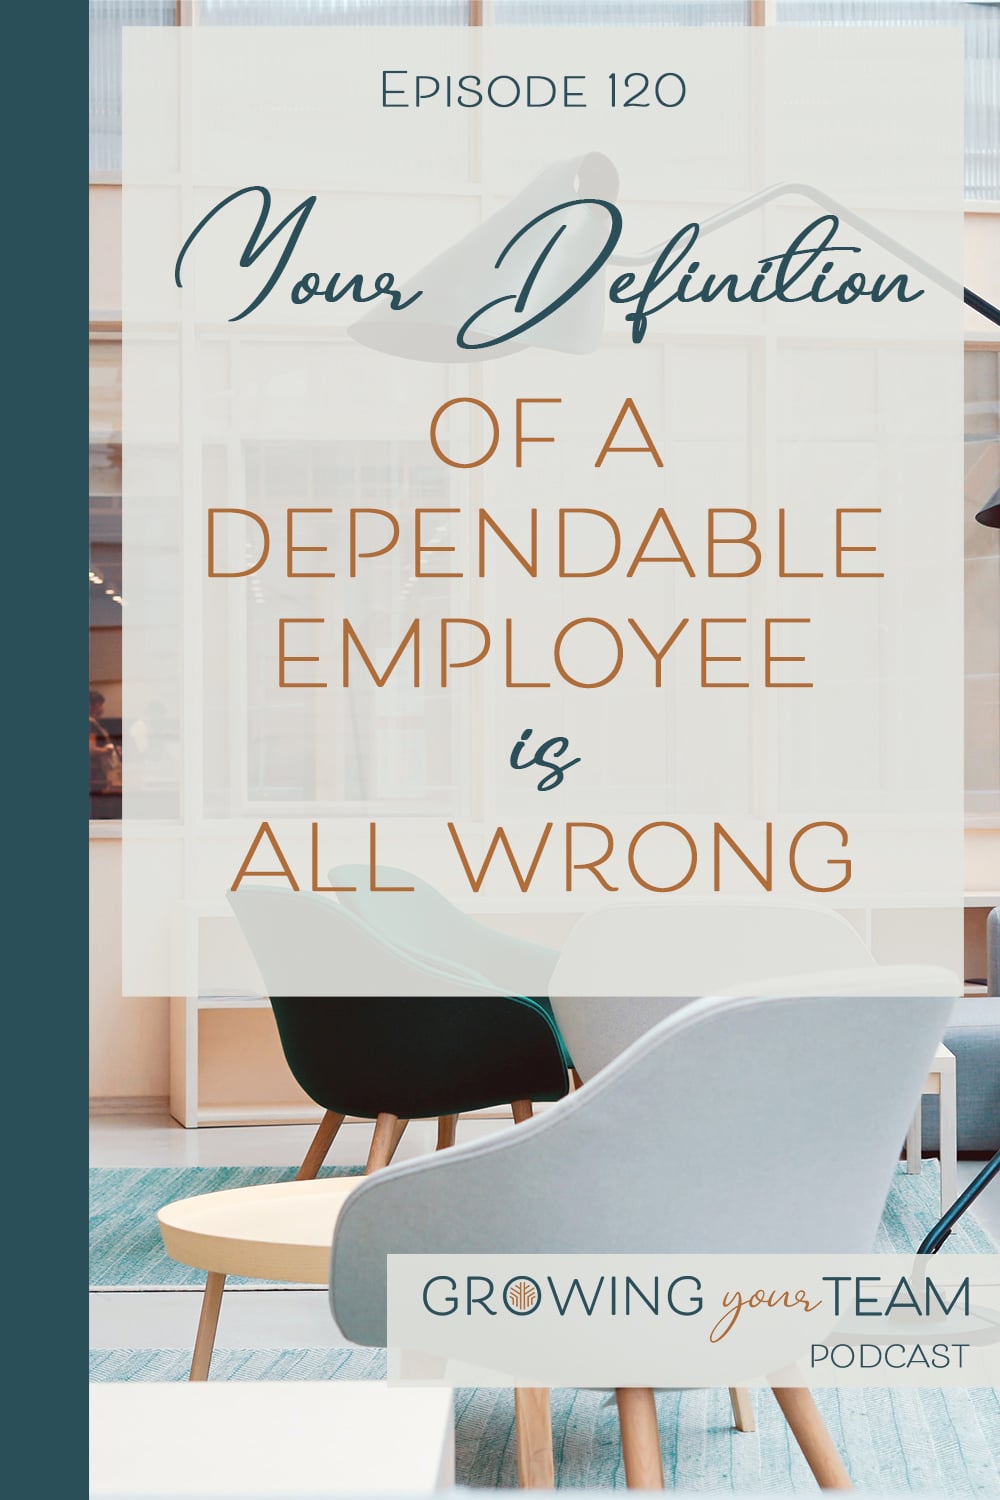 Definition of a Dependable Employee, Growing Your Team Podcast, Jamie Van Cuyk, Small Business